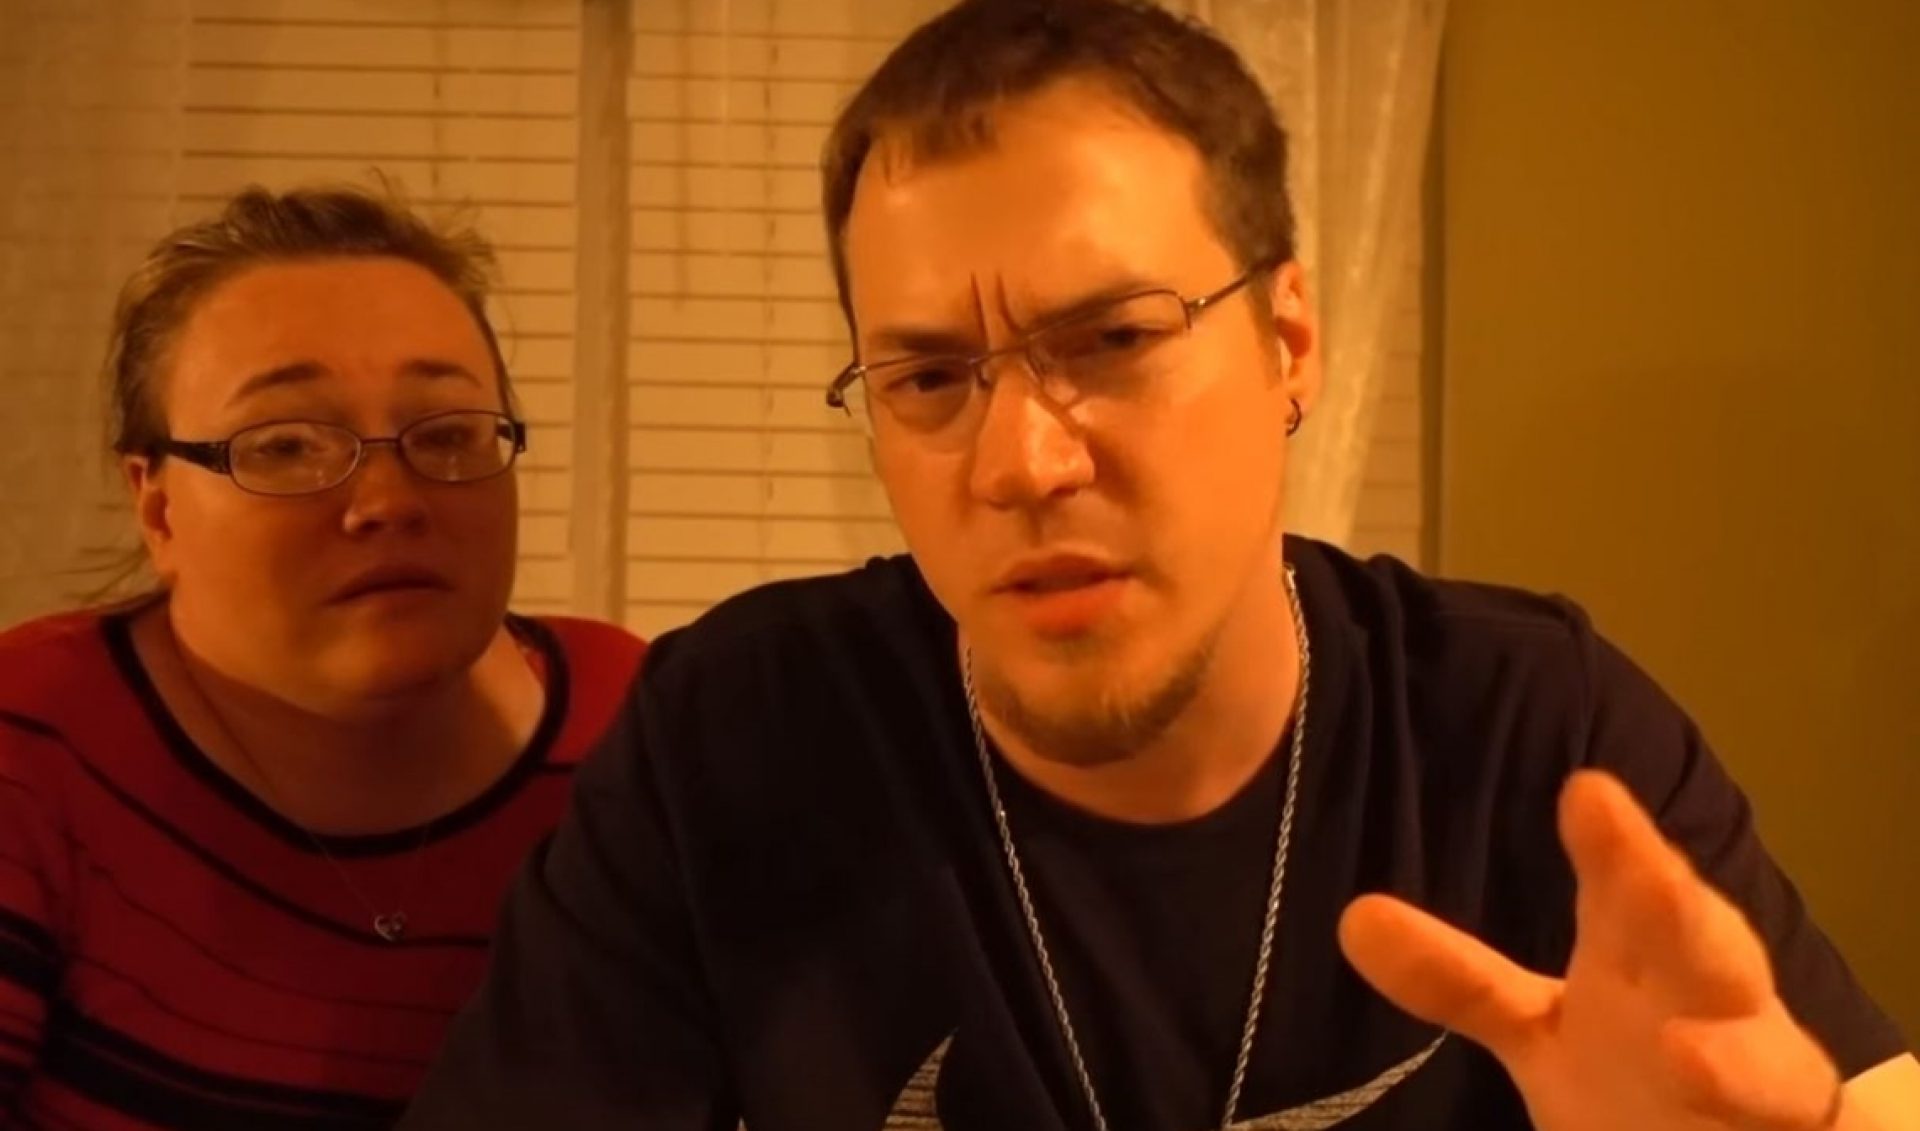 DaddyOFive Privates All YouTube Videos, Claims Cruel Pranks On Kids Were Faked